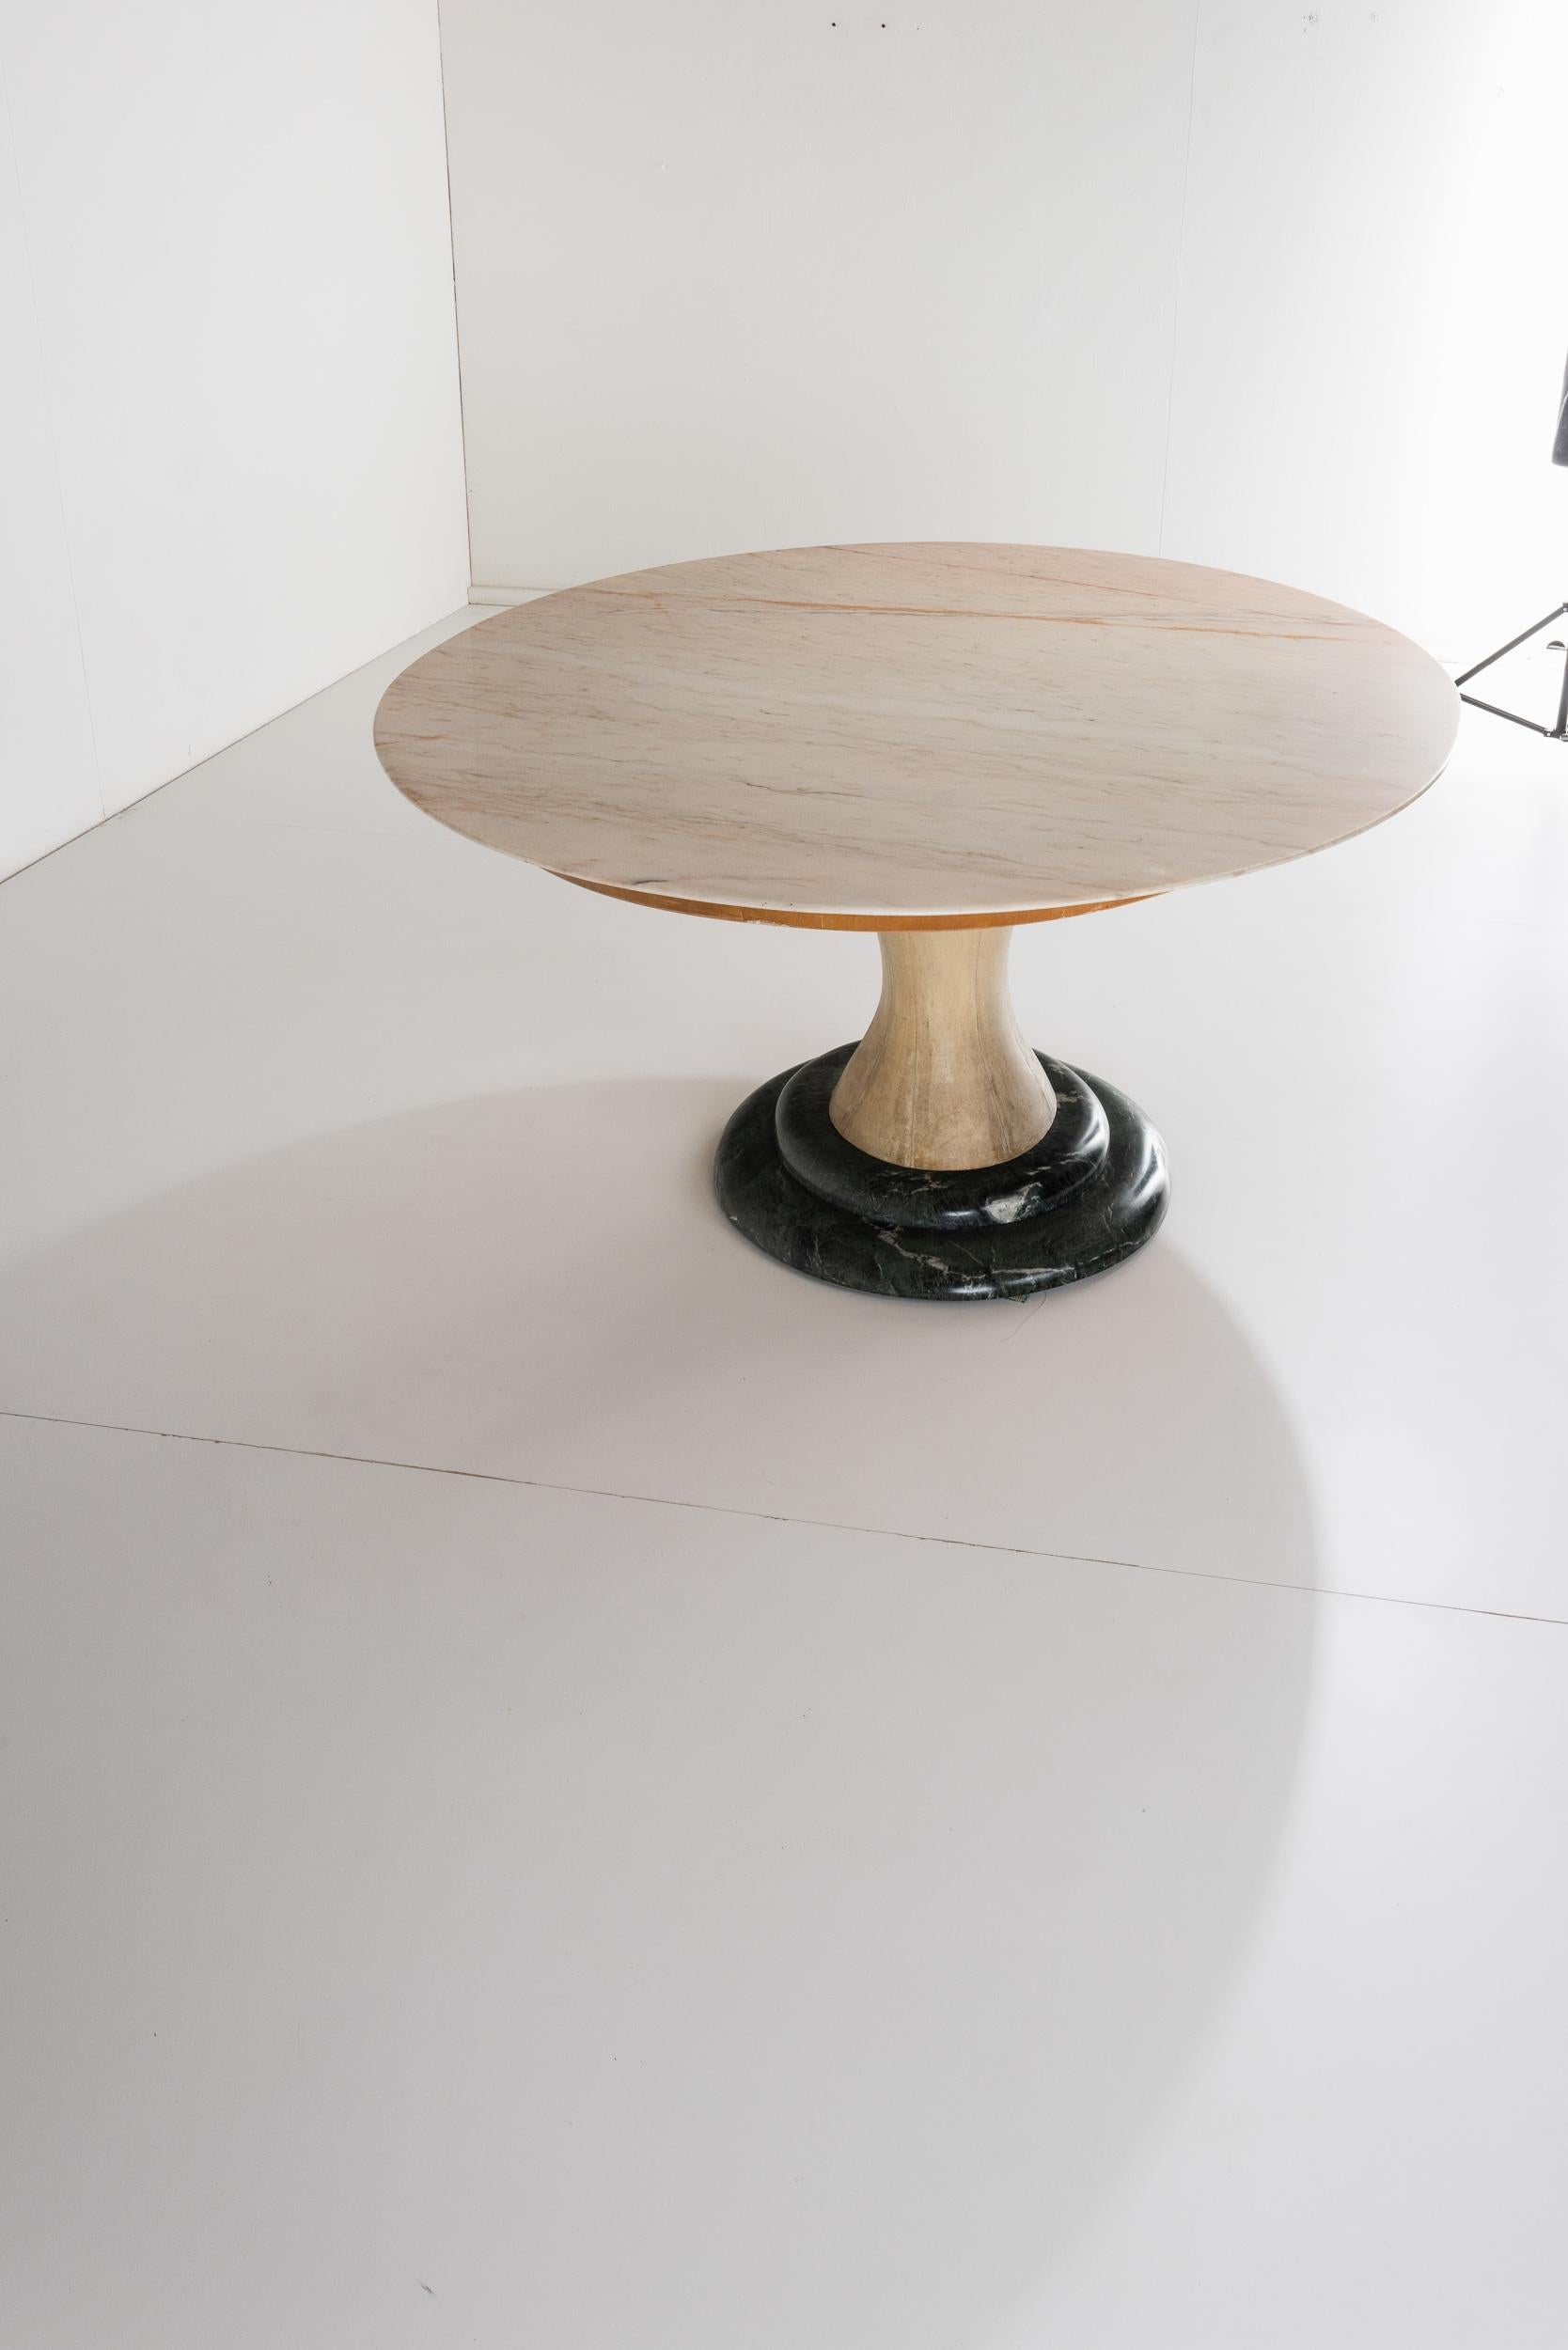 Guglielmo Ulrich Parchemin table with marble top. Italian design 1940s For Sale 3